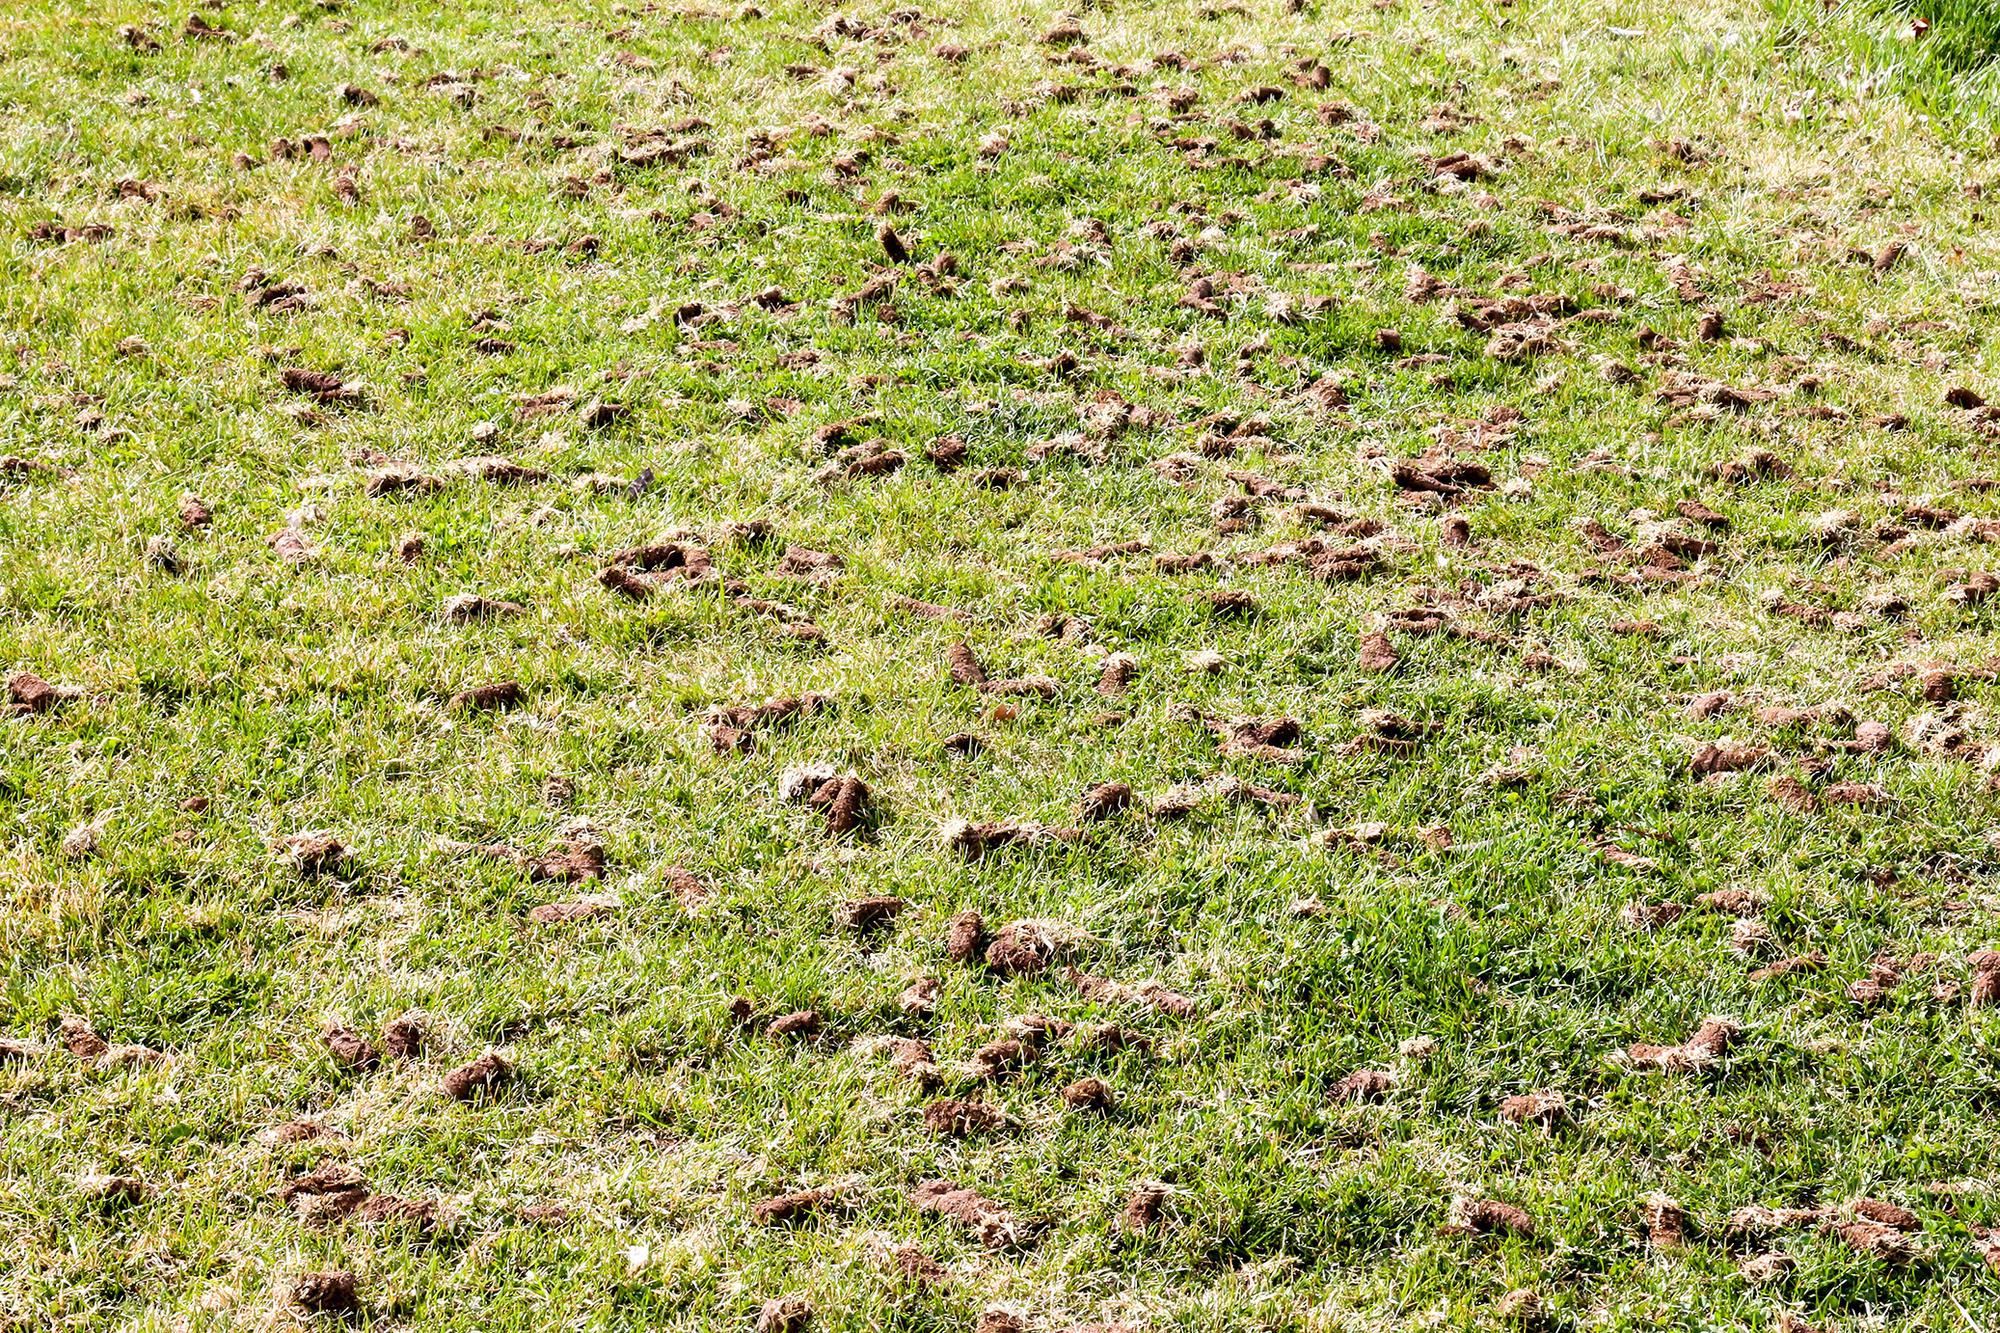 lawn with soil plugs laying from where aerated holes were made